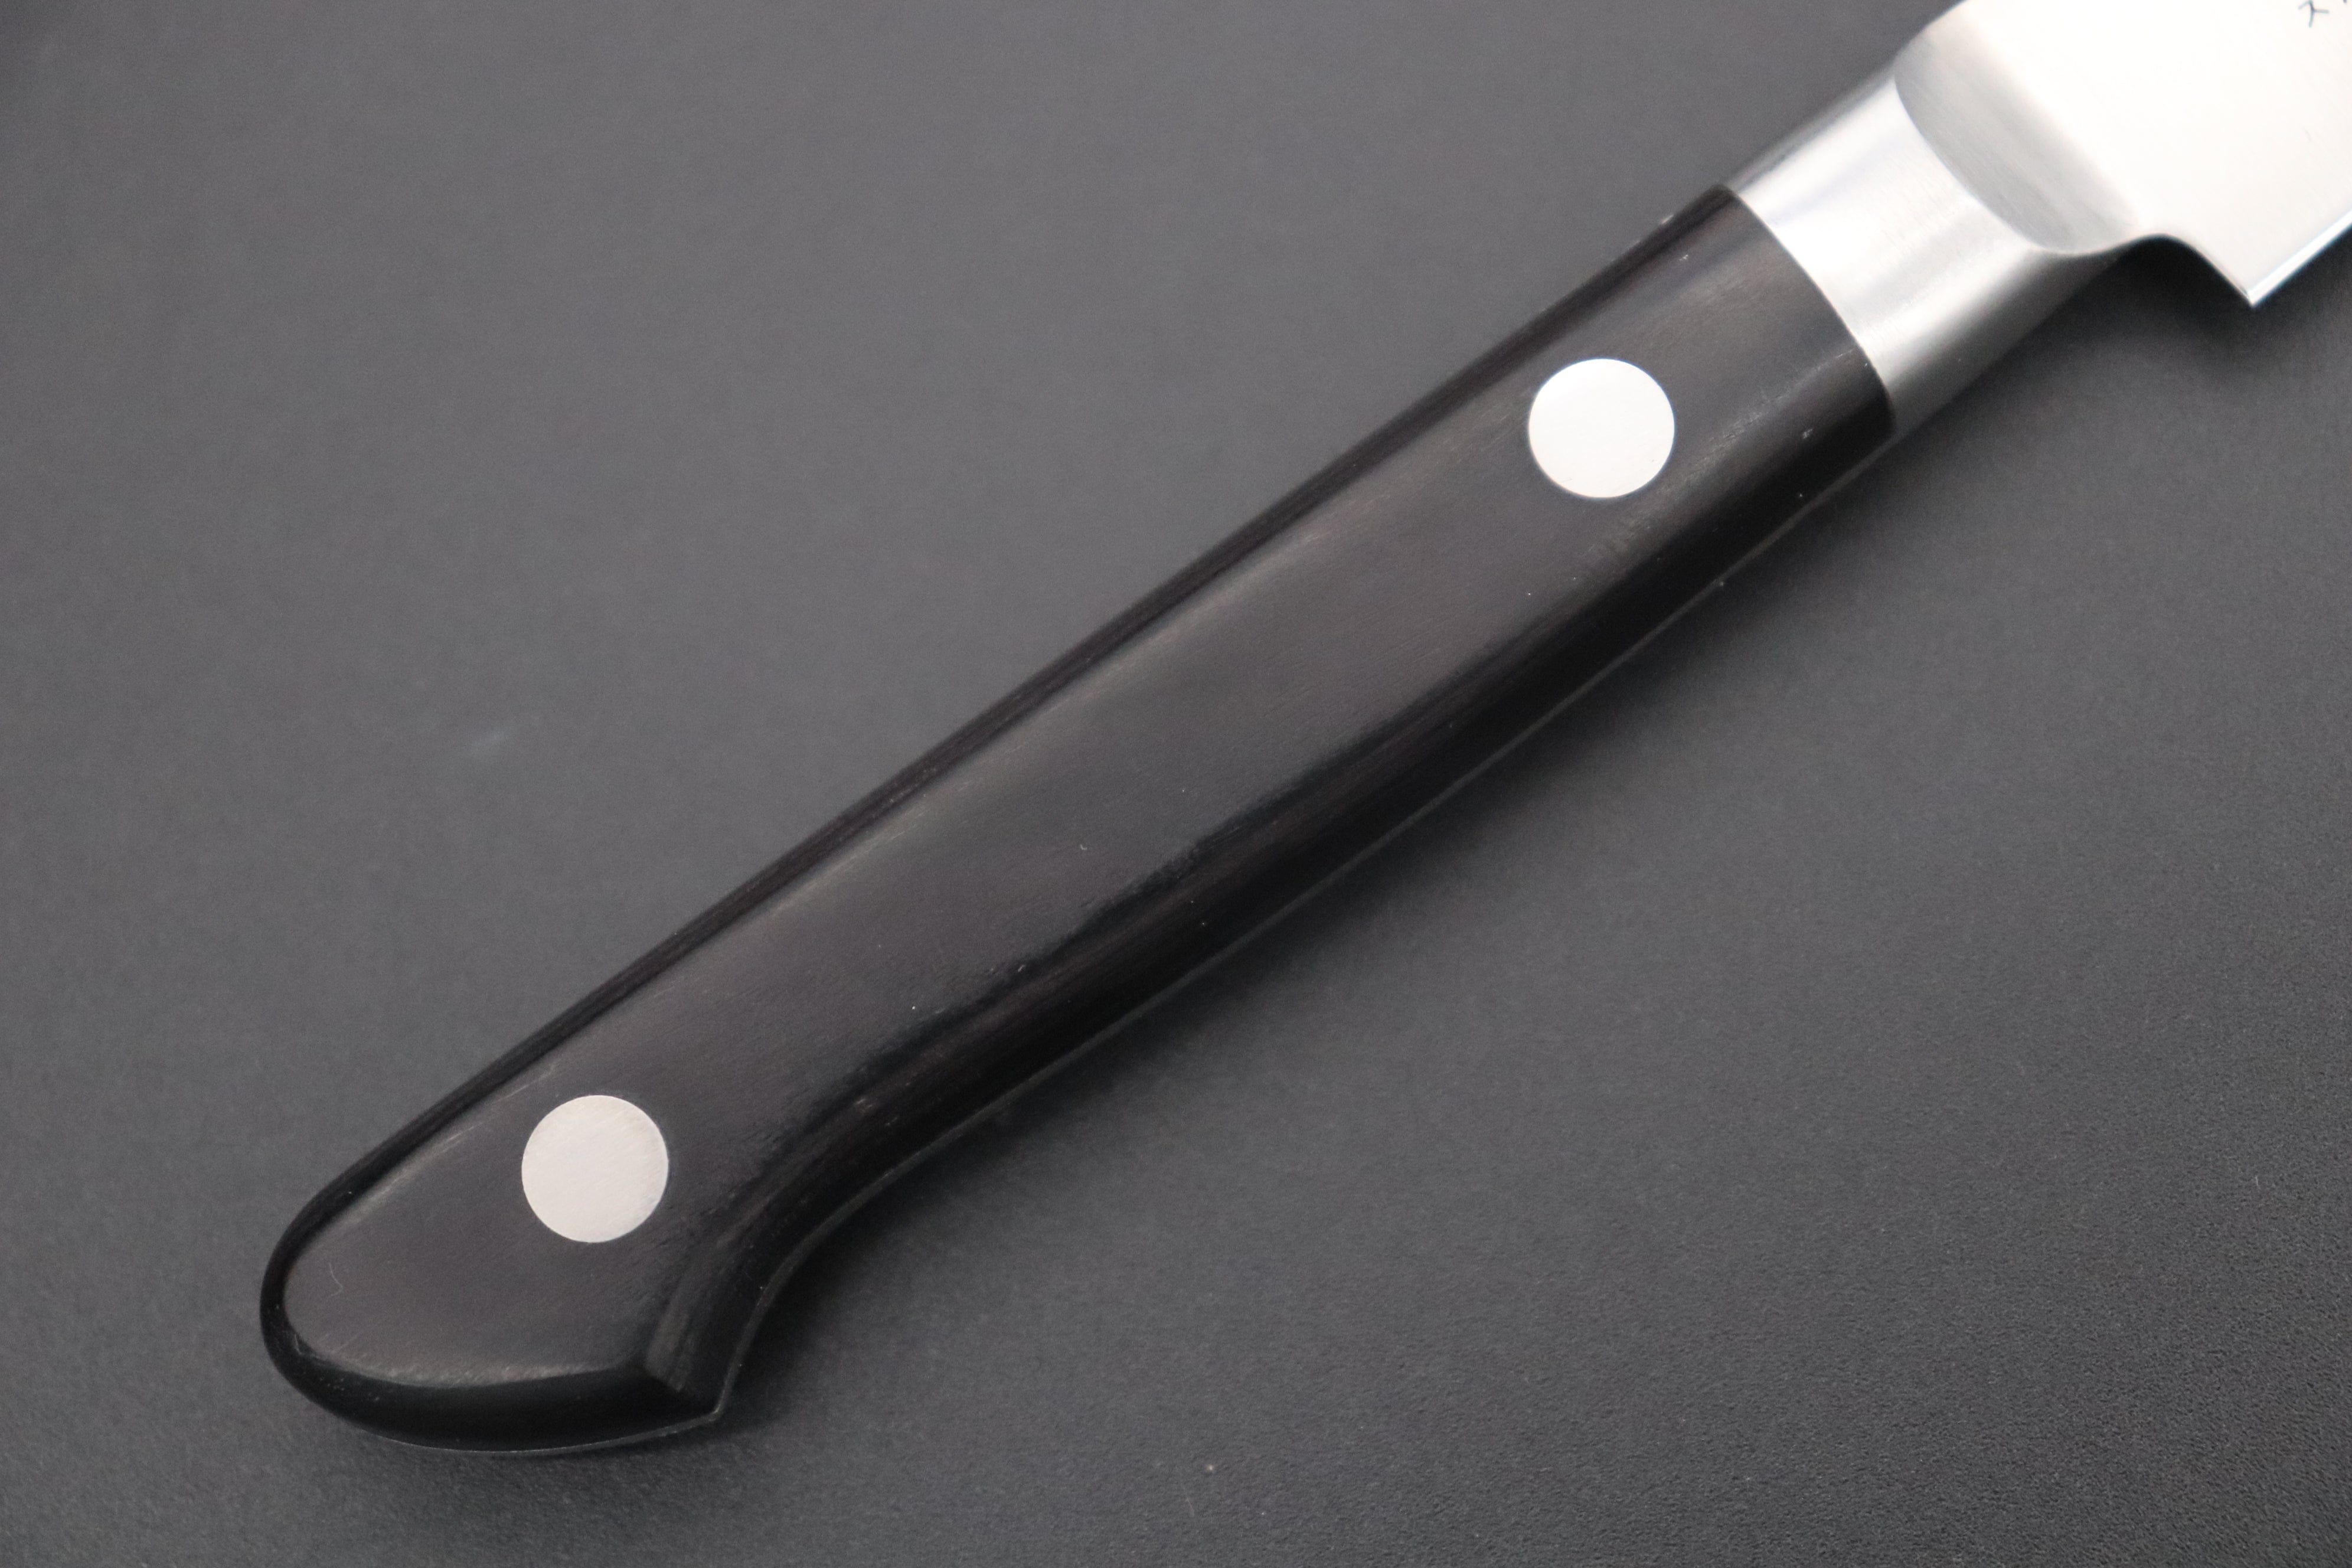 Japanese Paring Knife - SUISIN - Molybdenum Stainless Serie - Size: 8cm